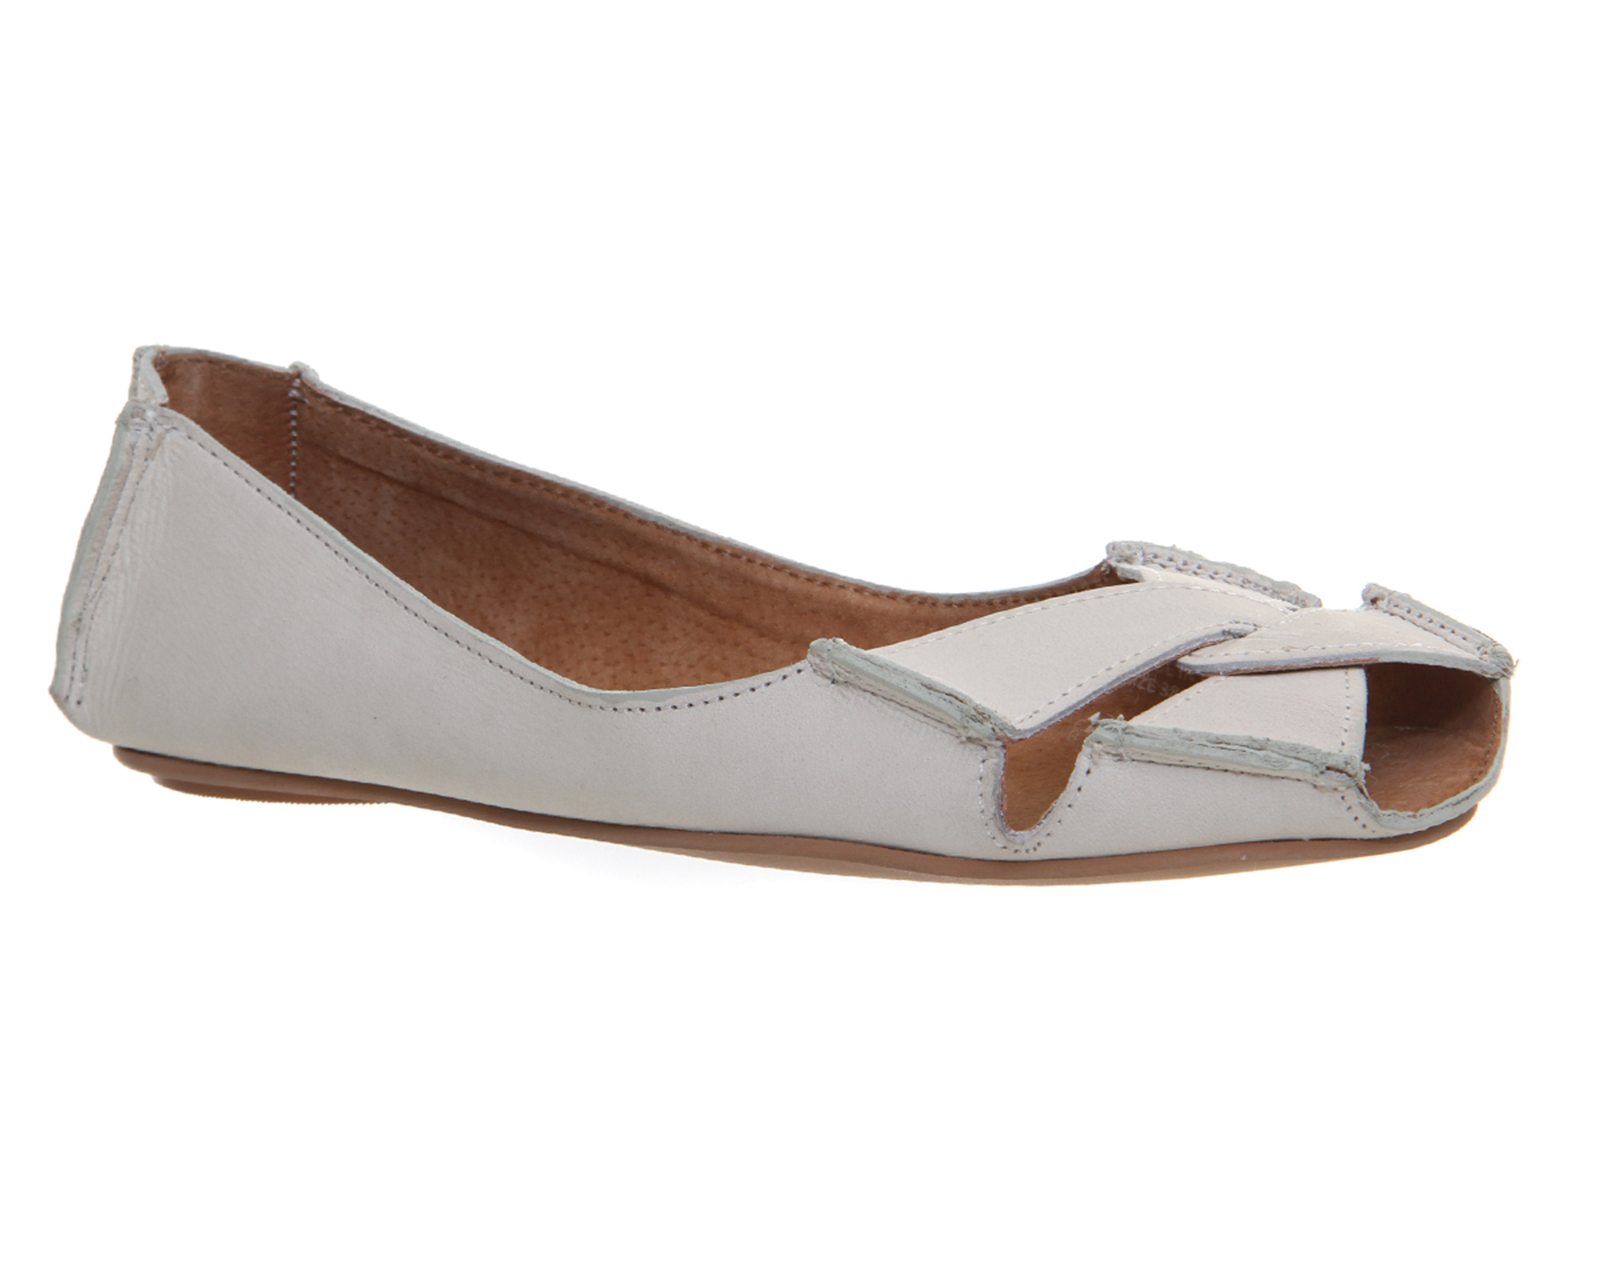 OFFICELuxe Softy Peep ShoesWhite Leather